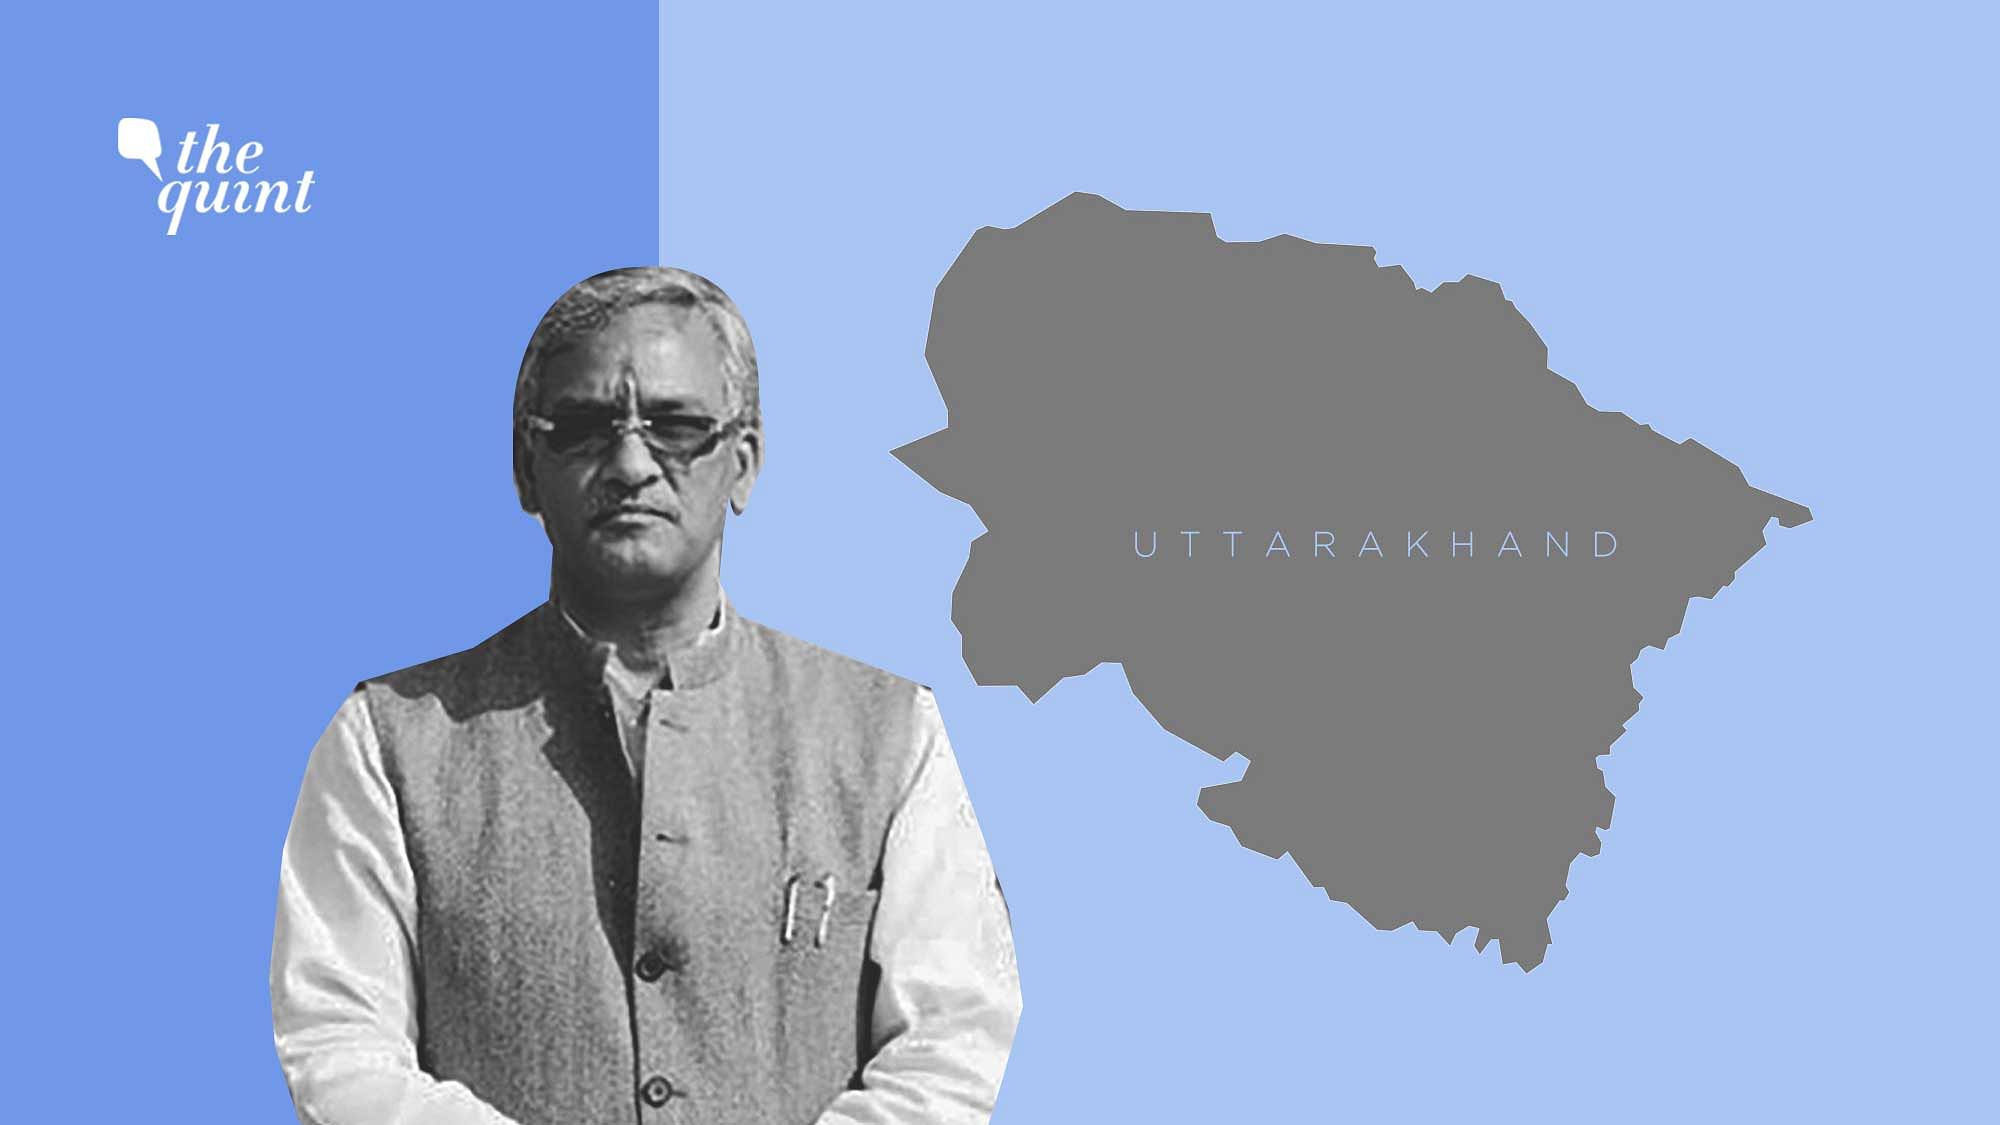 Uttarakhand CM Trivendra Singh Rawat on Tuesday, 9 March, resigned from his post amid rising political turmoil in the state.